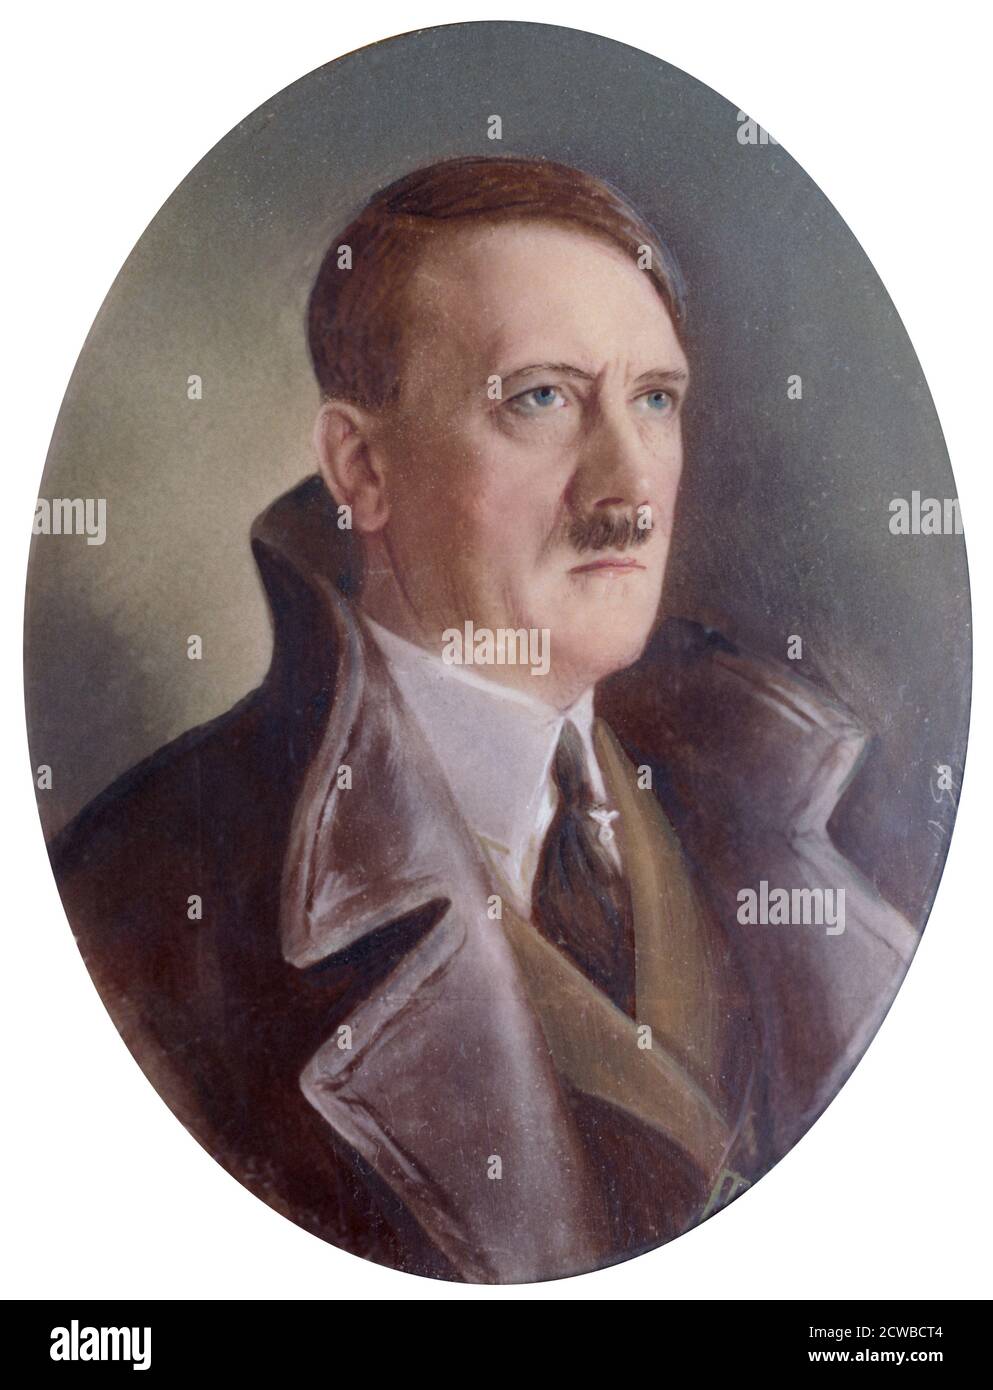 Adolf Hitler, German Nazi leader. Adolf Hitler (1889-1945) became leader of the National Socialist German Workers (Nazi) party in 1921. After an unsuccessful coup attempt in Munich in 1923, Hitler was imprisoned. He set about pursuing power by democratic means. His nationalistic and anti-semitic message quickly gained support after Germany was humiliated by defeat in World War I and the harsh terms of the Treaty of Versailles and, from the late 1920s, suffering from economic collapse. Hitler came to power in 1933, and persuaded the Reichstag (parliament) to grant him dictatorial powers. He cru Stock Photo